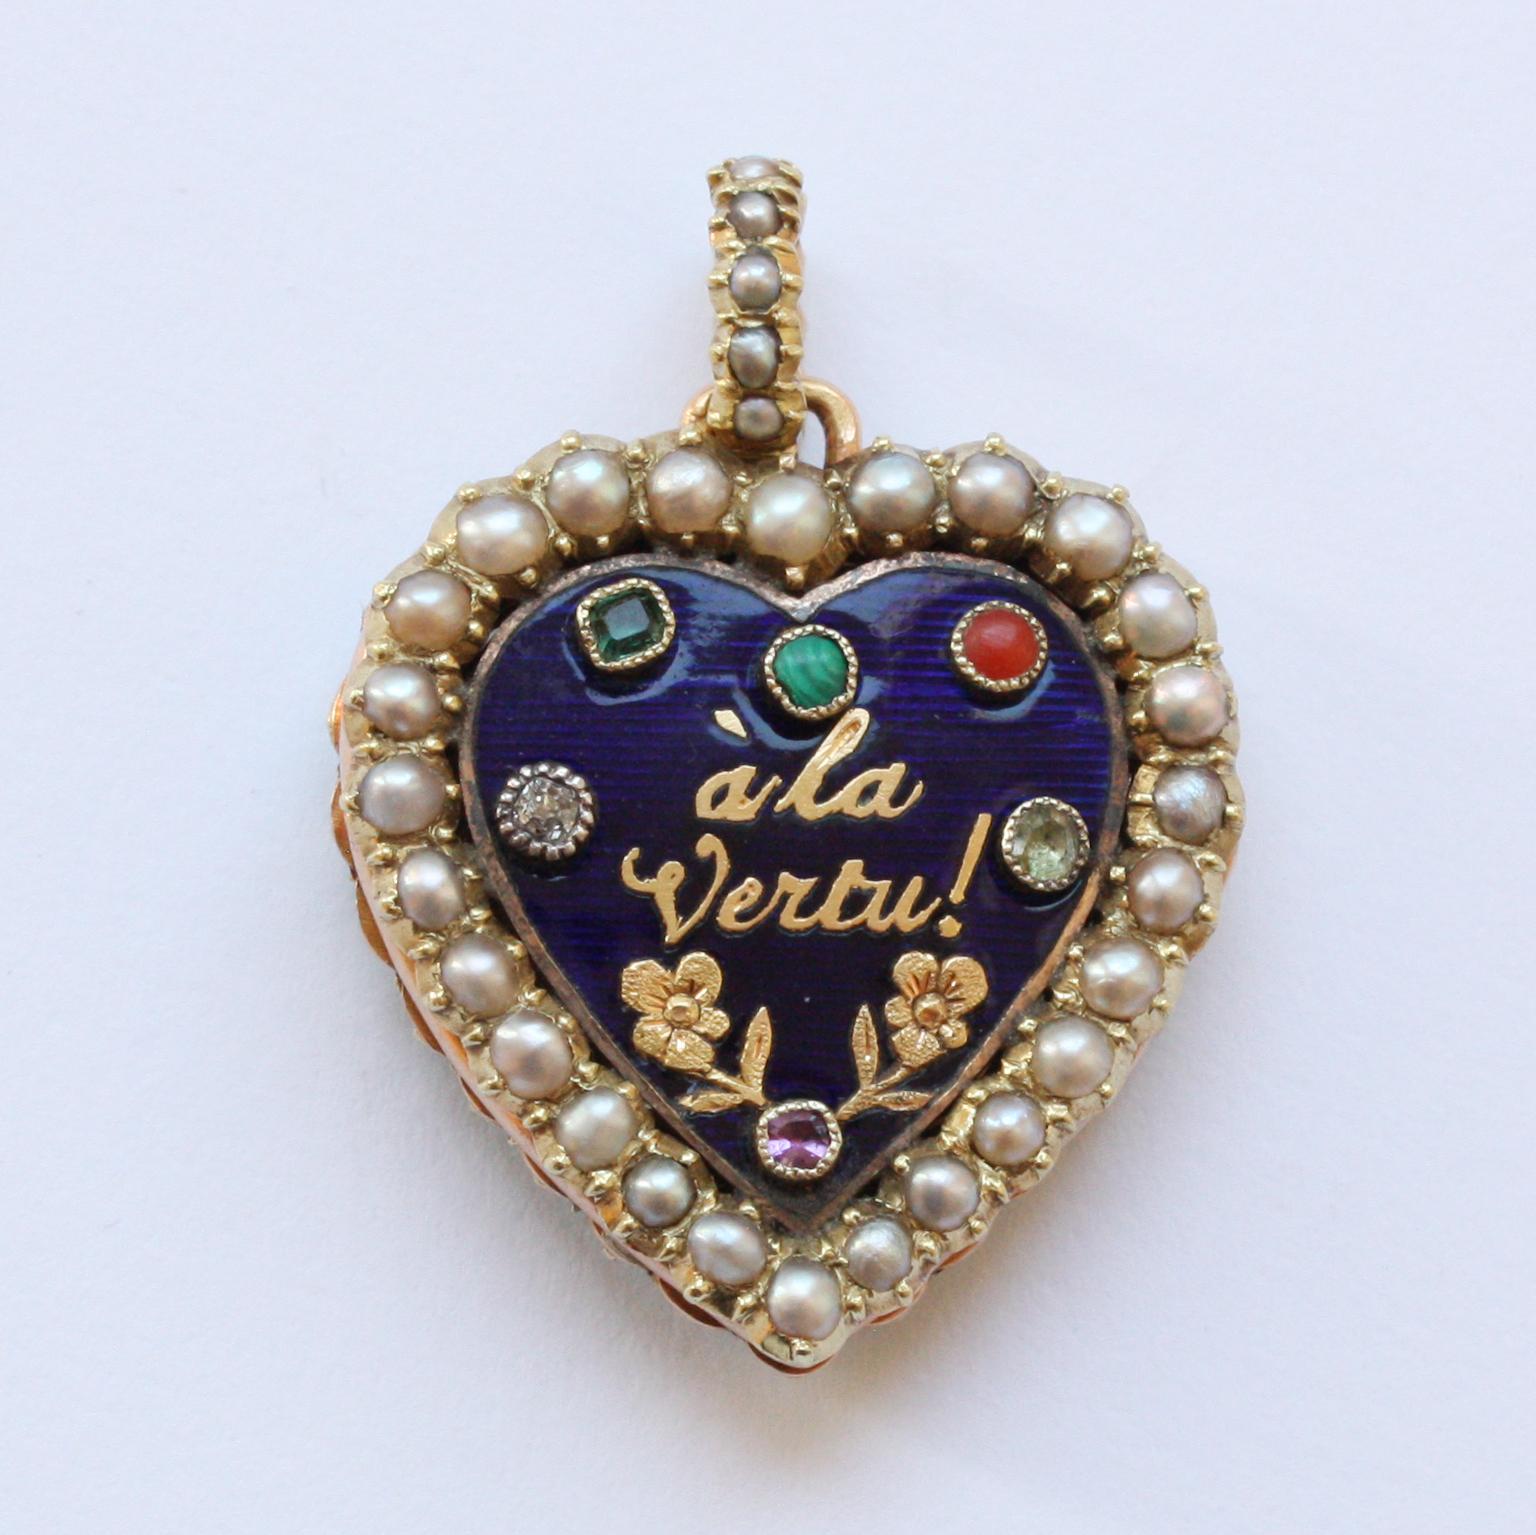 A two sided Georgian gold locket, one side with a pearl border and hoop with a blue enamel plaque on the inside set with different gemstones and in gold the text: ‘à la vertu‘ (to virtue) adn two gold flowers, the reverse says: ‘L’amitié les a